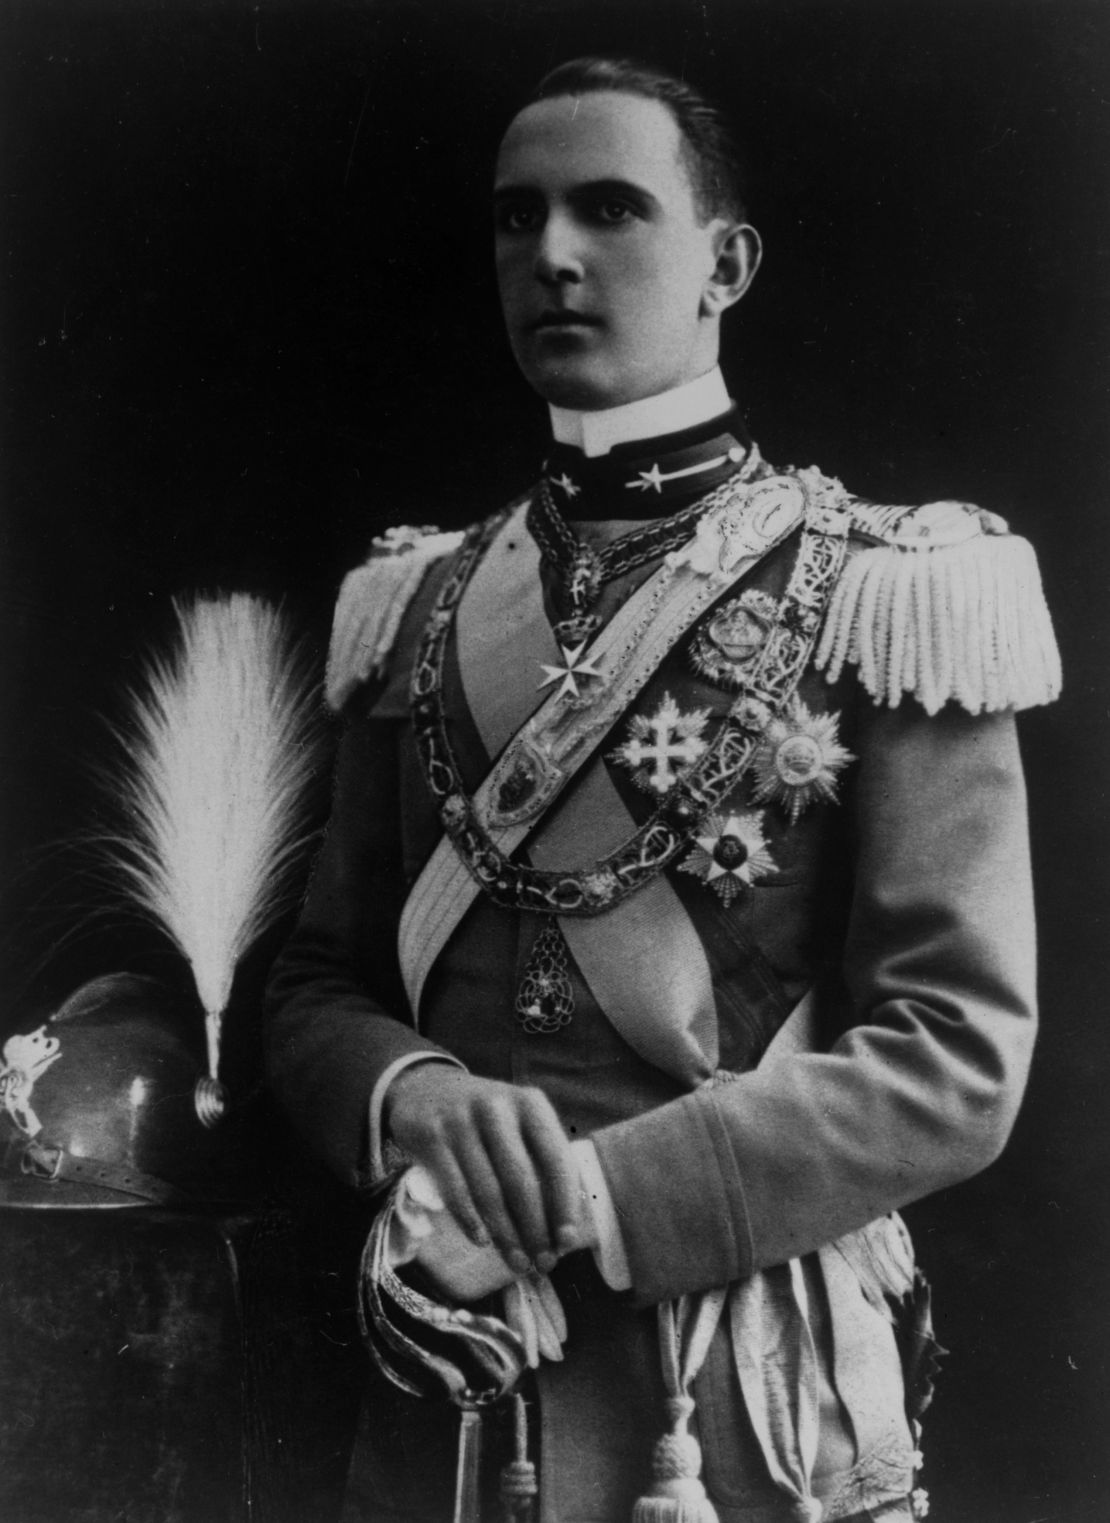 King Umberto II of Italy (1904-1983), pictured in around 1940 